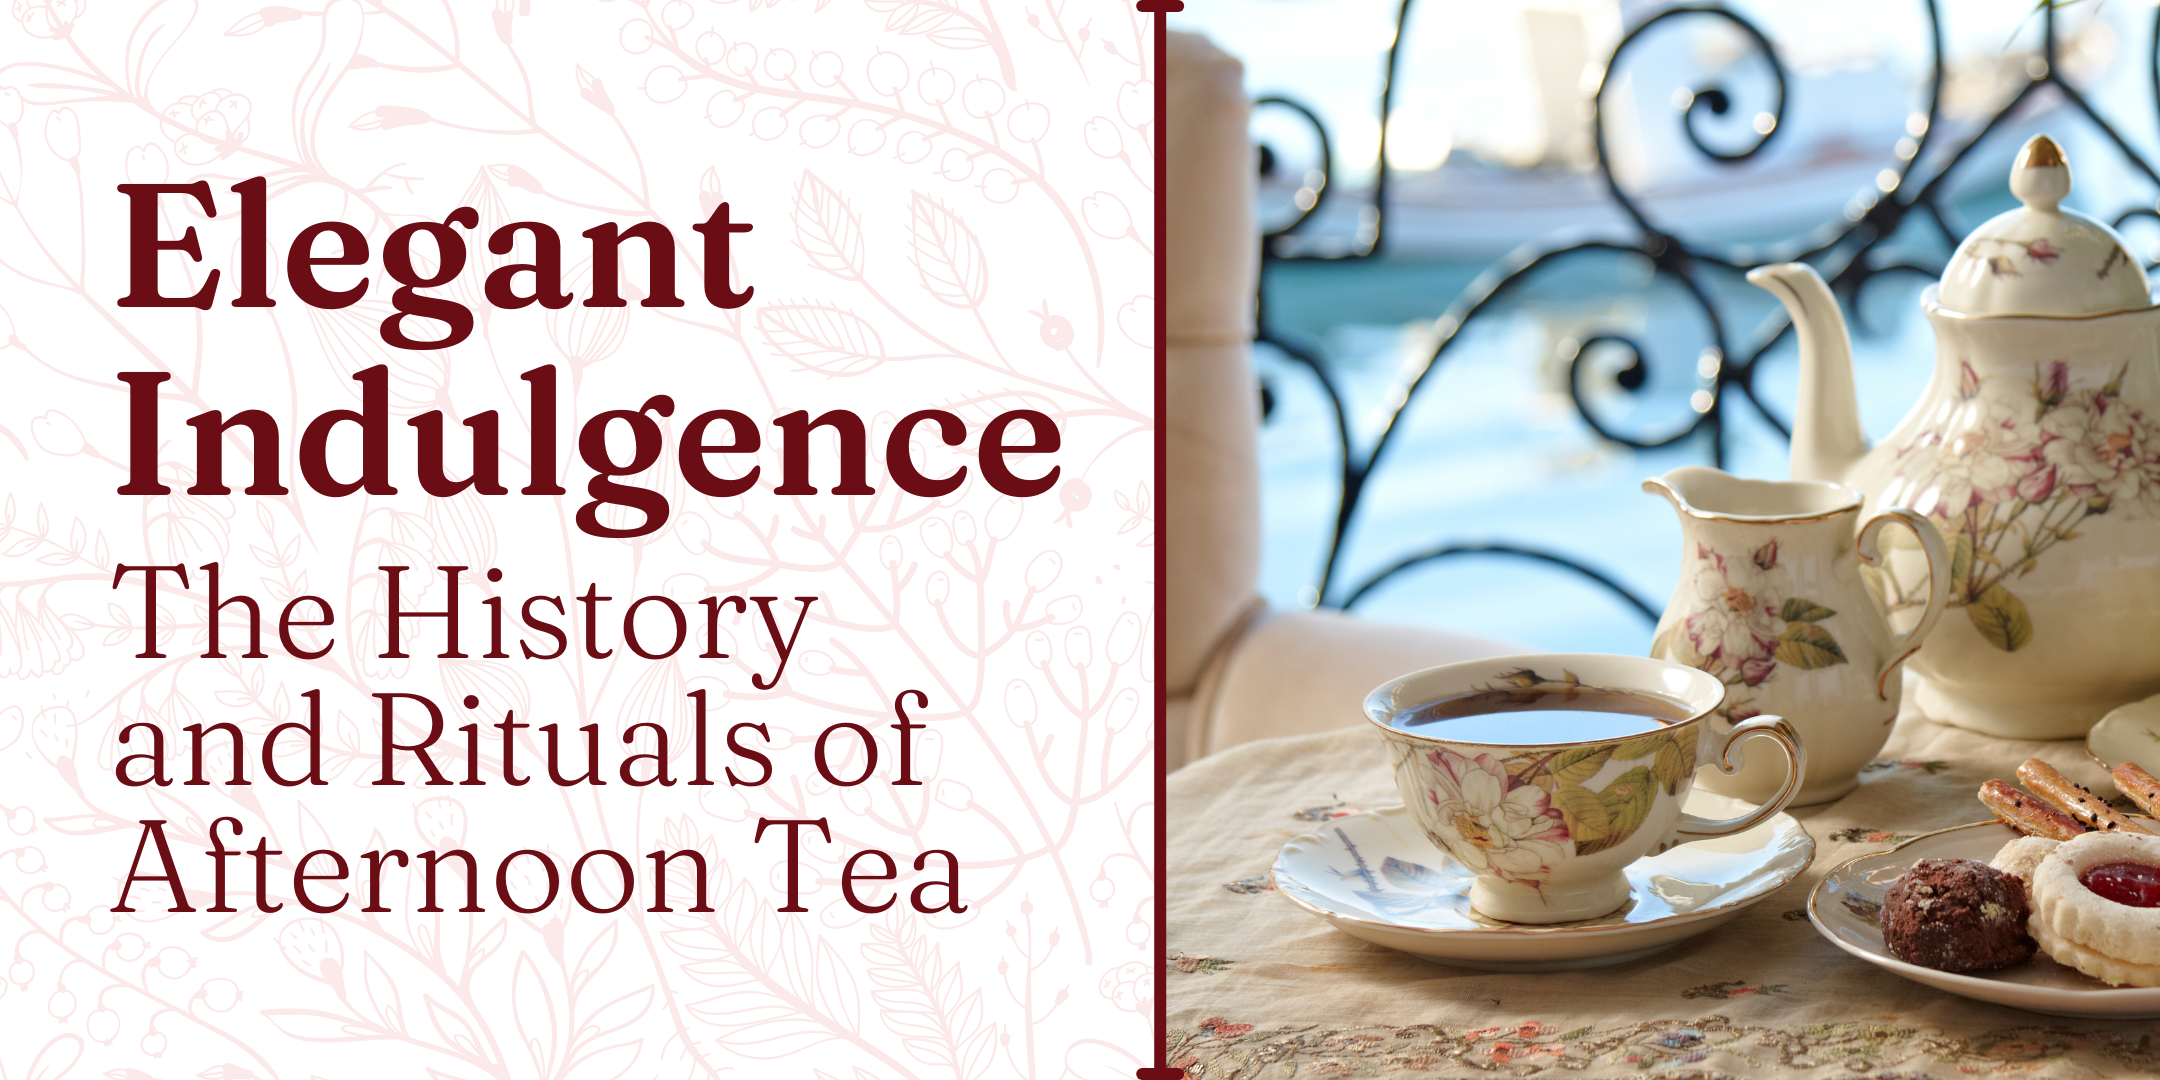 image of "Elegant Indulgence: The History and Rituals of Afternoon Tea"